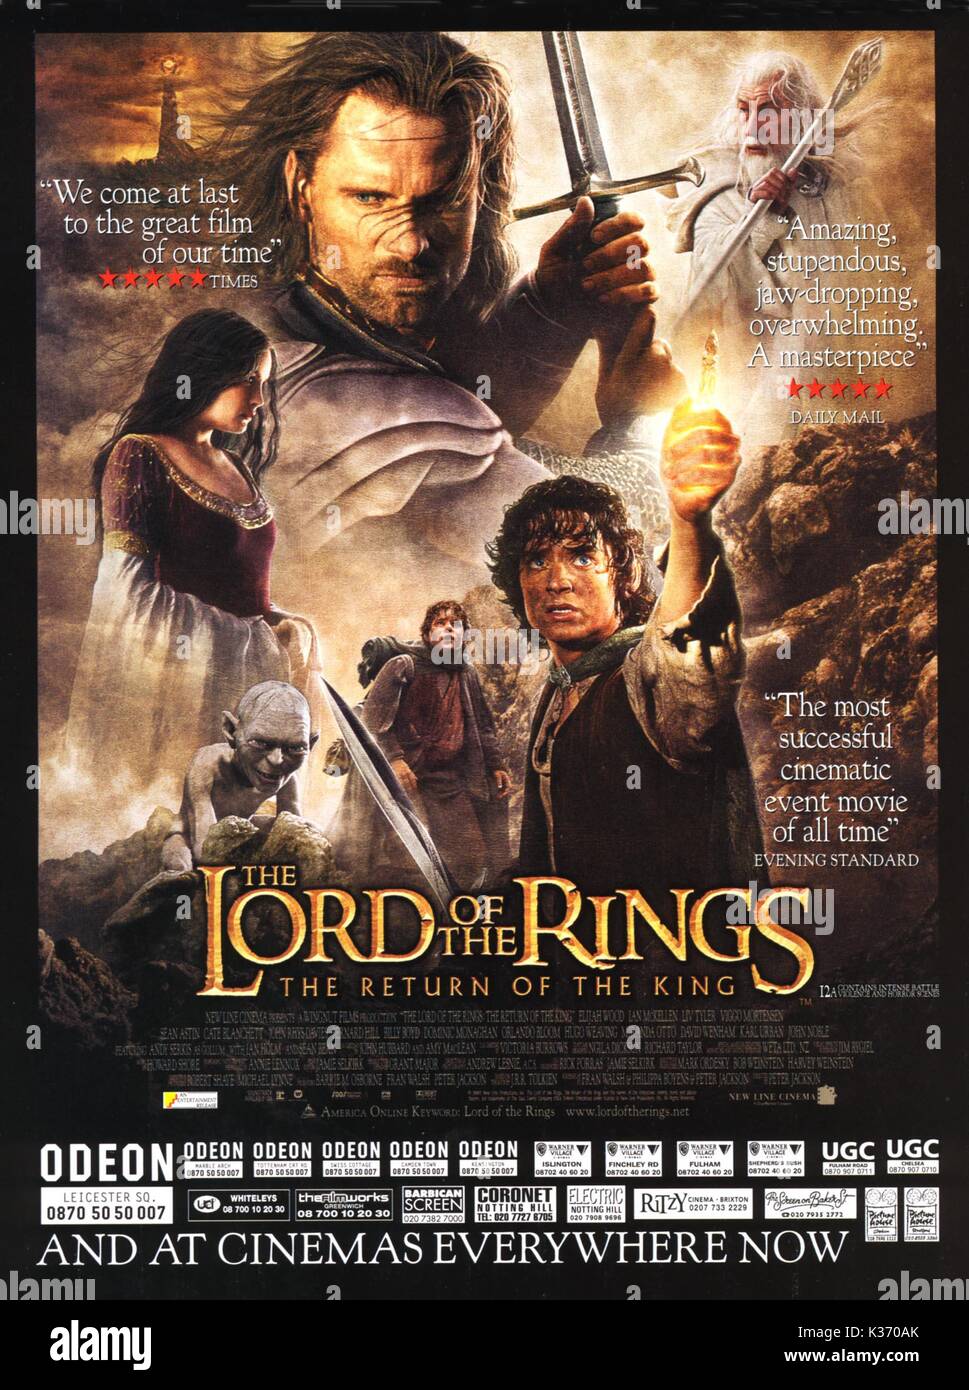 Lord Of the Rings, The Motion Picture Trilogy (2003) – Original